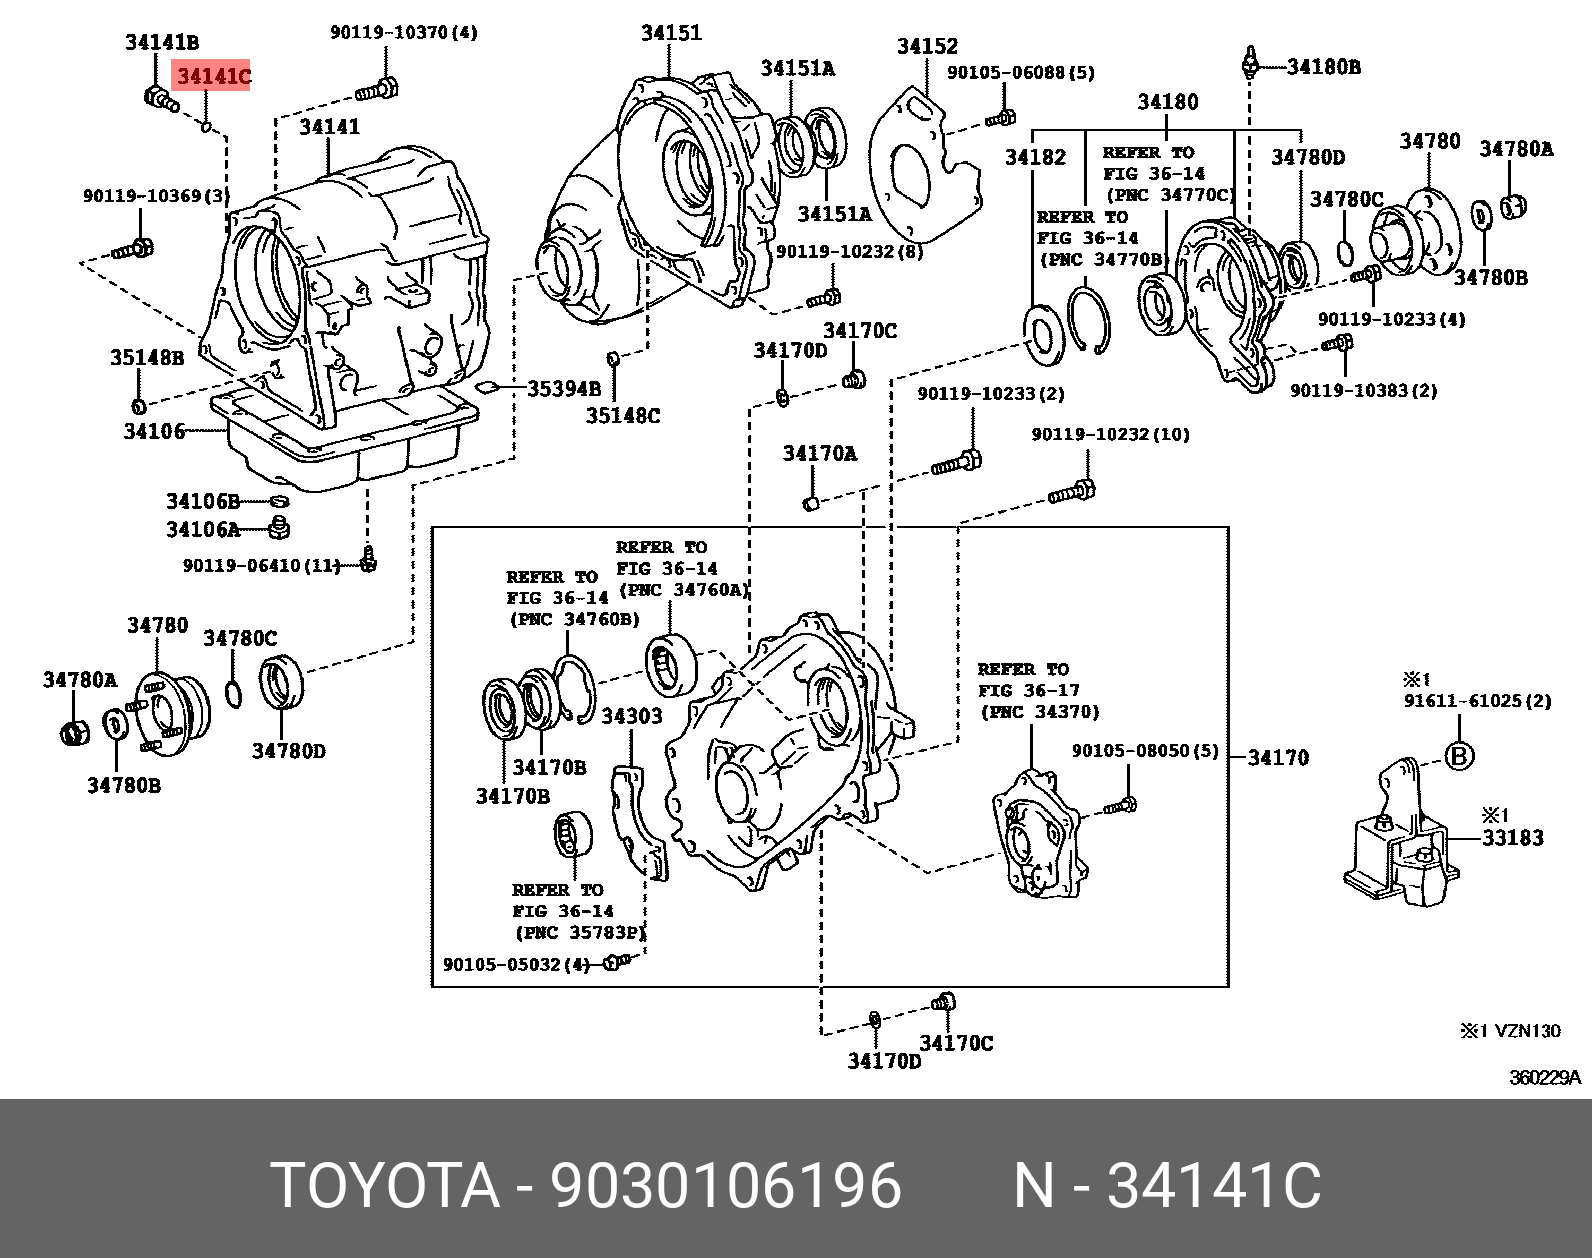 CAMRY 200109 - 200601, RING, O (FOR TRANSAXLE CASE PLUG NO.1)